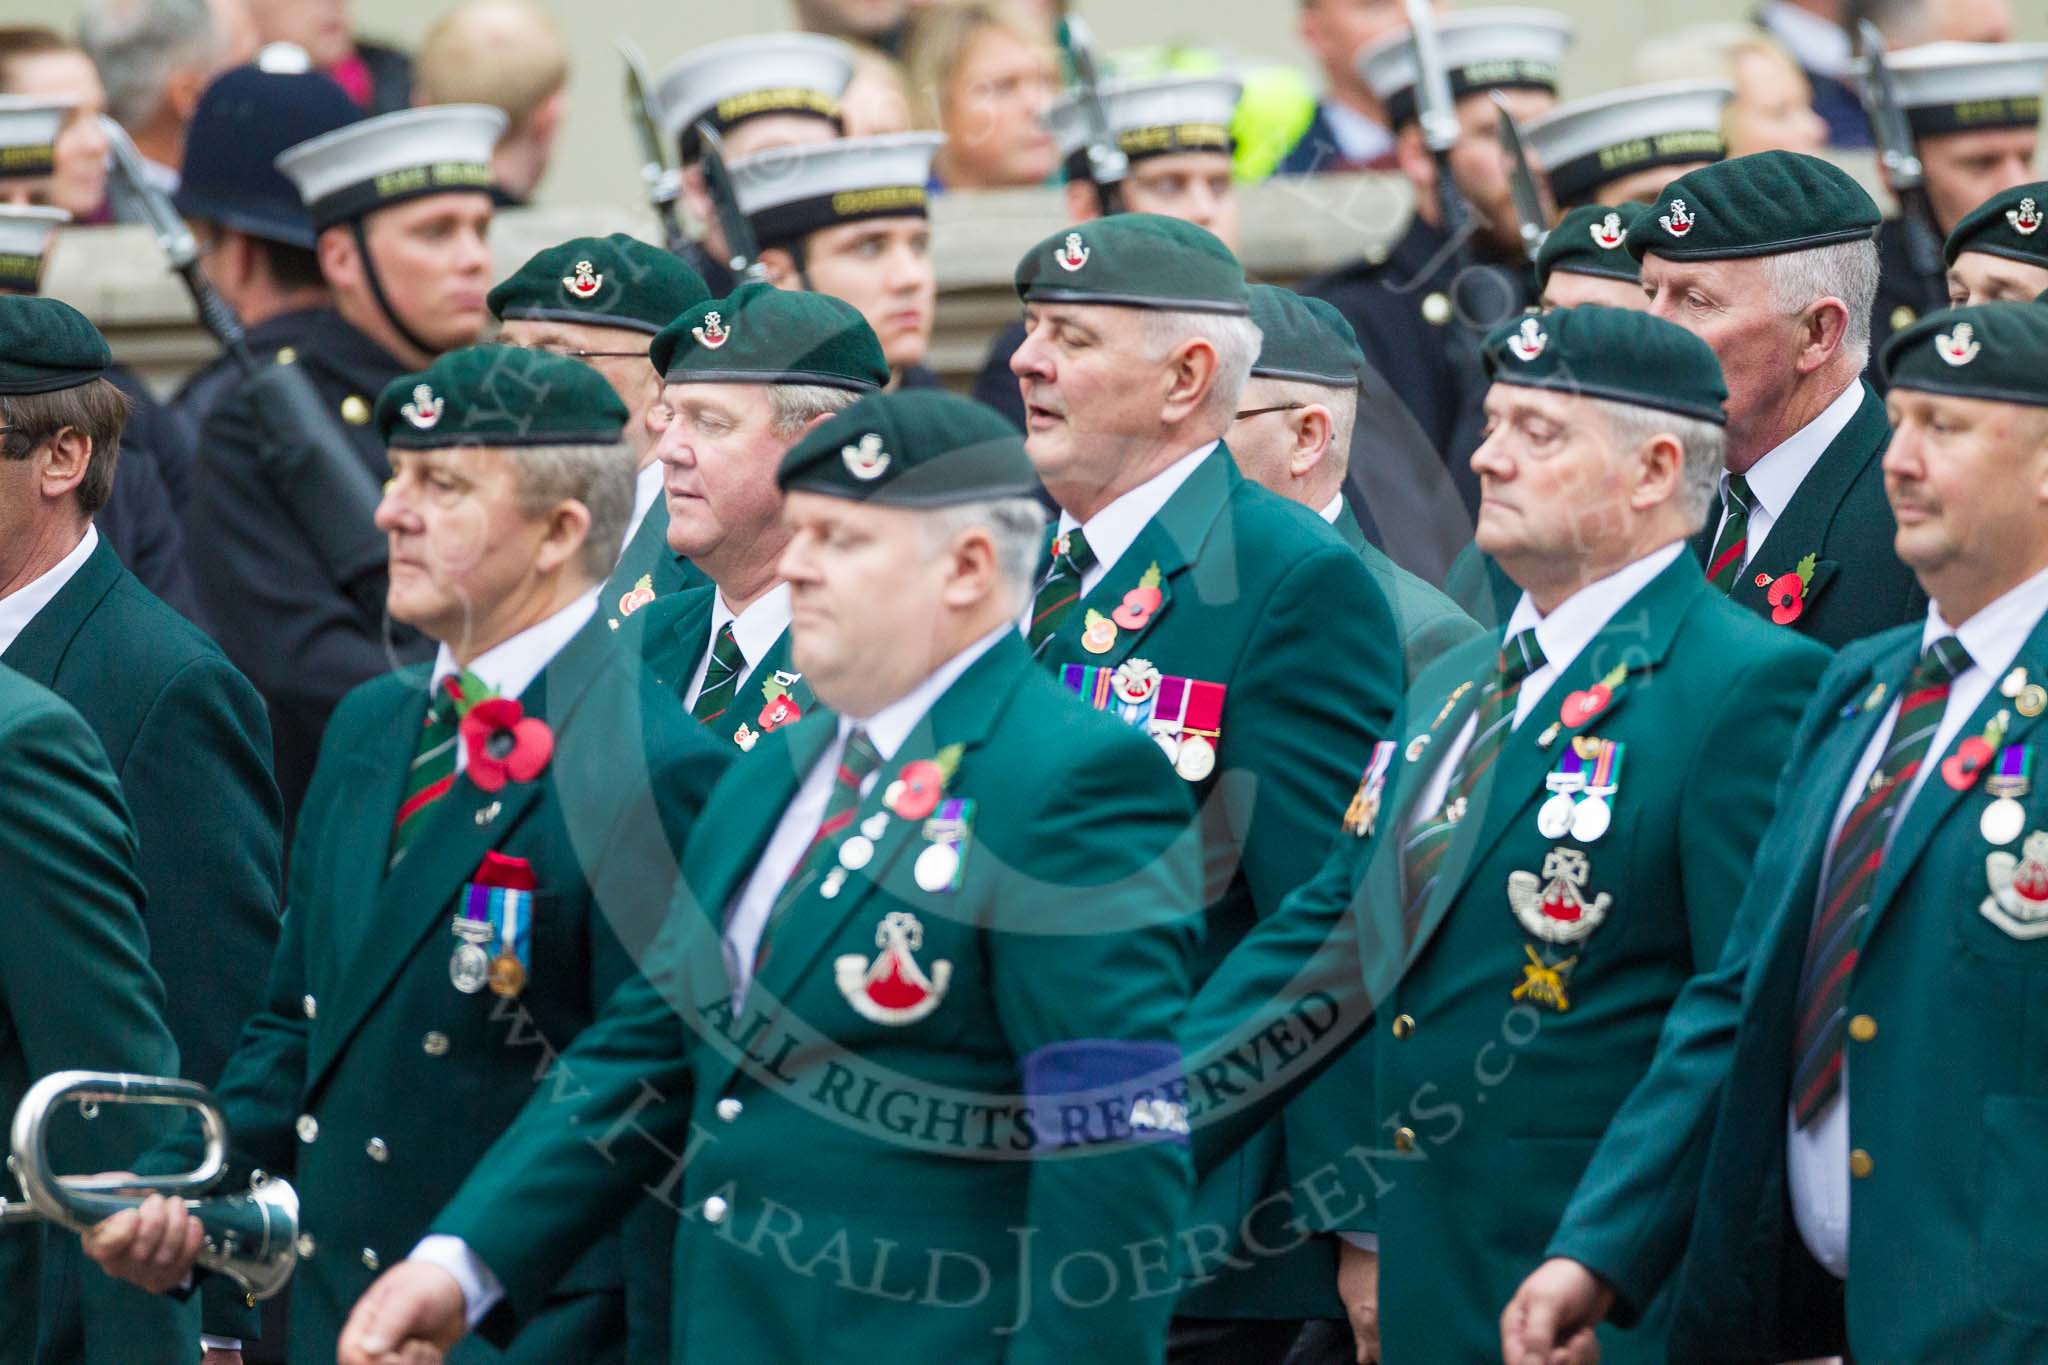 Remembrance Sunday at the Cenotaph 2015: Group A1, 1LI Association.
Cenotaph, Whitehall, London SW1,
London,
Greater London,
United Kingdom,
on 08 November 2015 at 12:07, image #1145